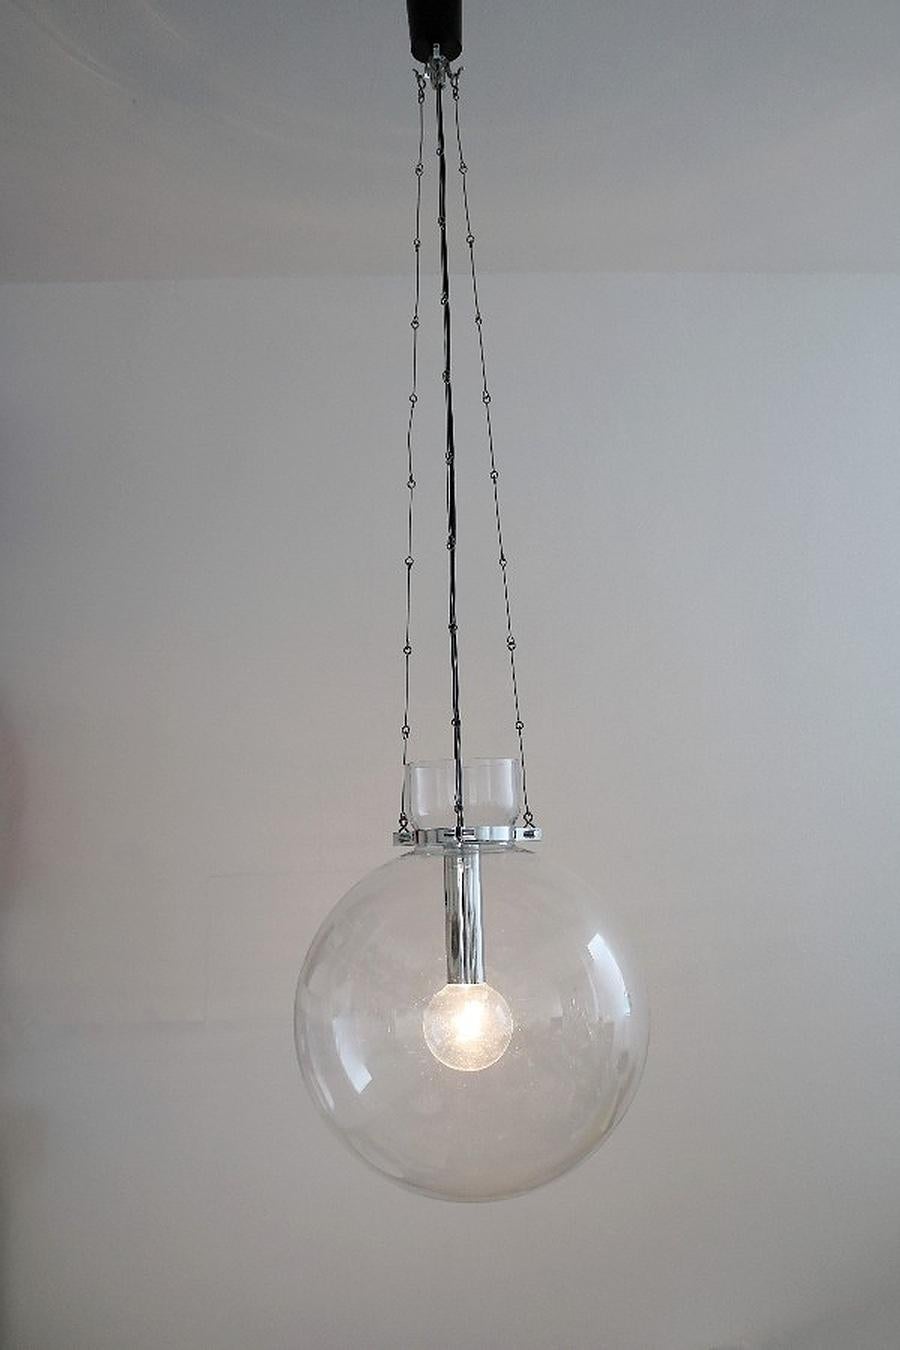 Huge Mouthblown glass pendant lamp in good condition with natural patina. Space Age, 1970s. The total height of 140cm/55inch includes the lamp holder.